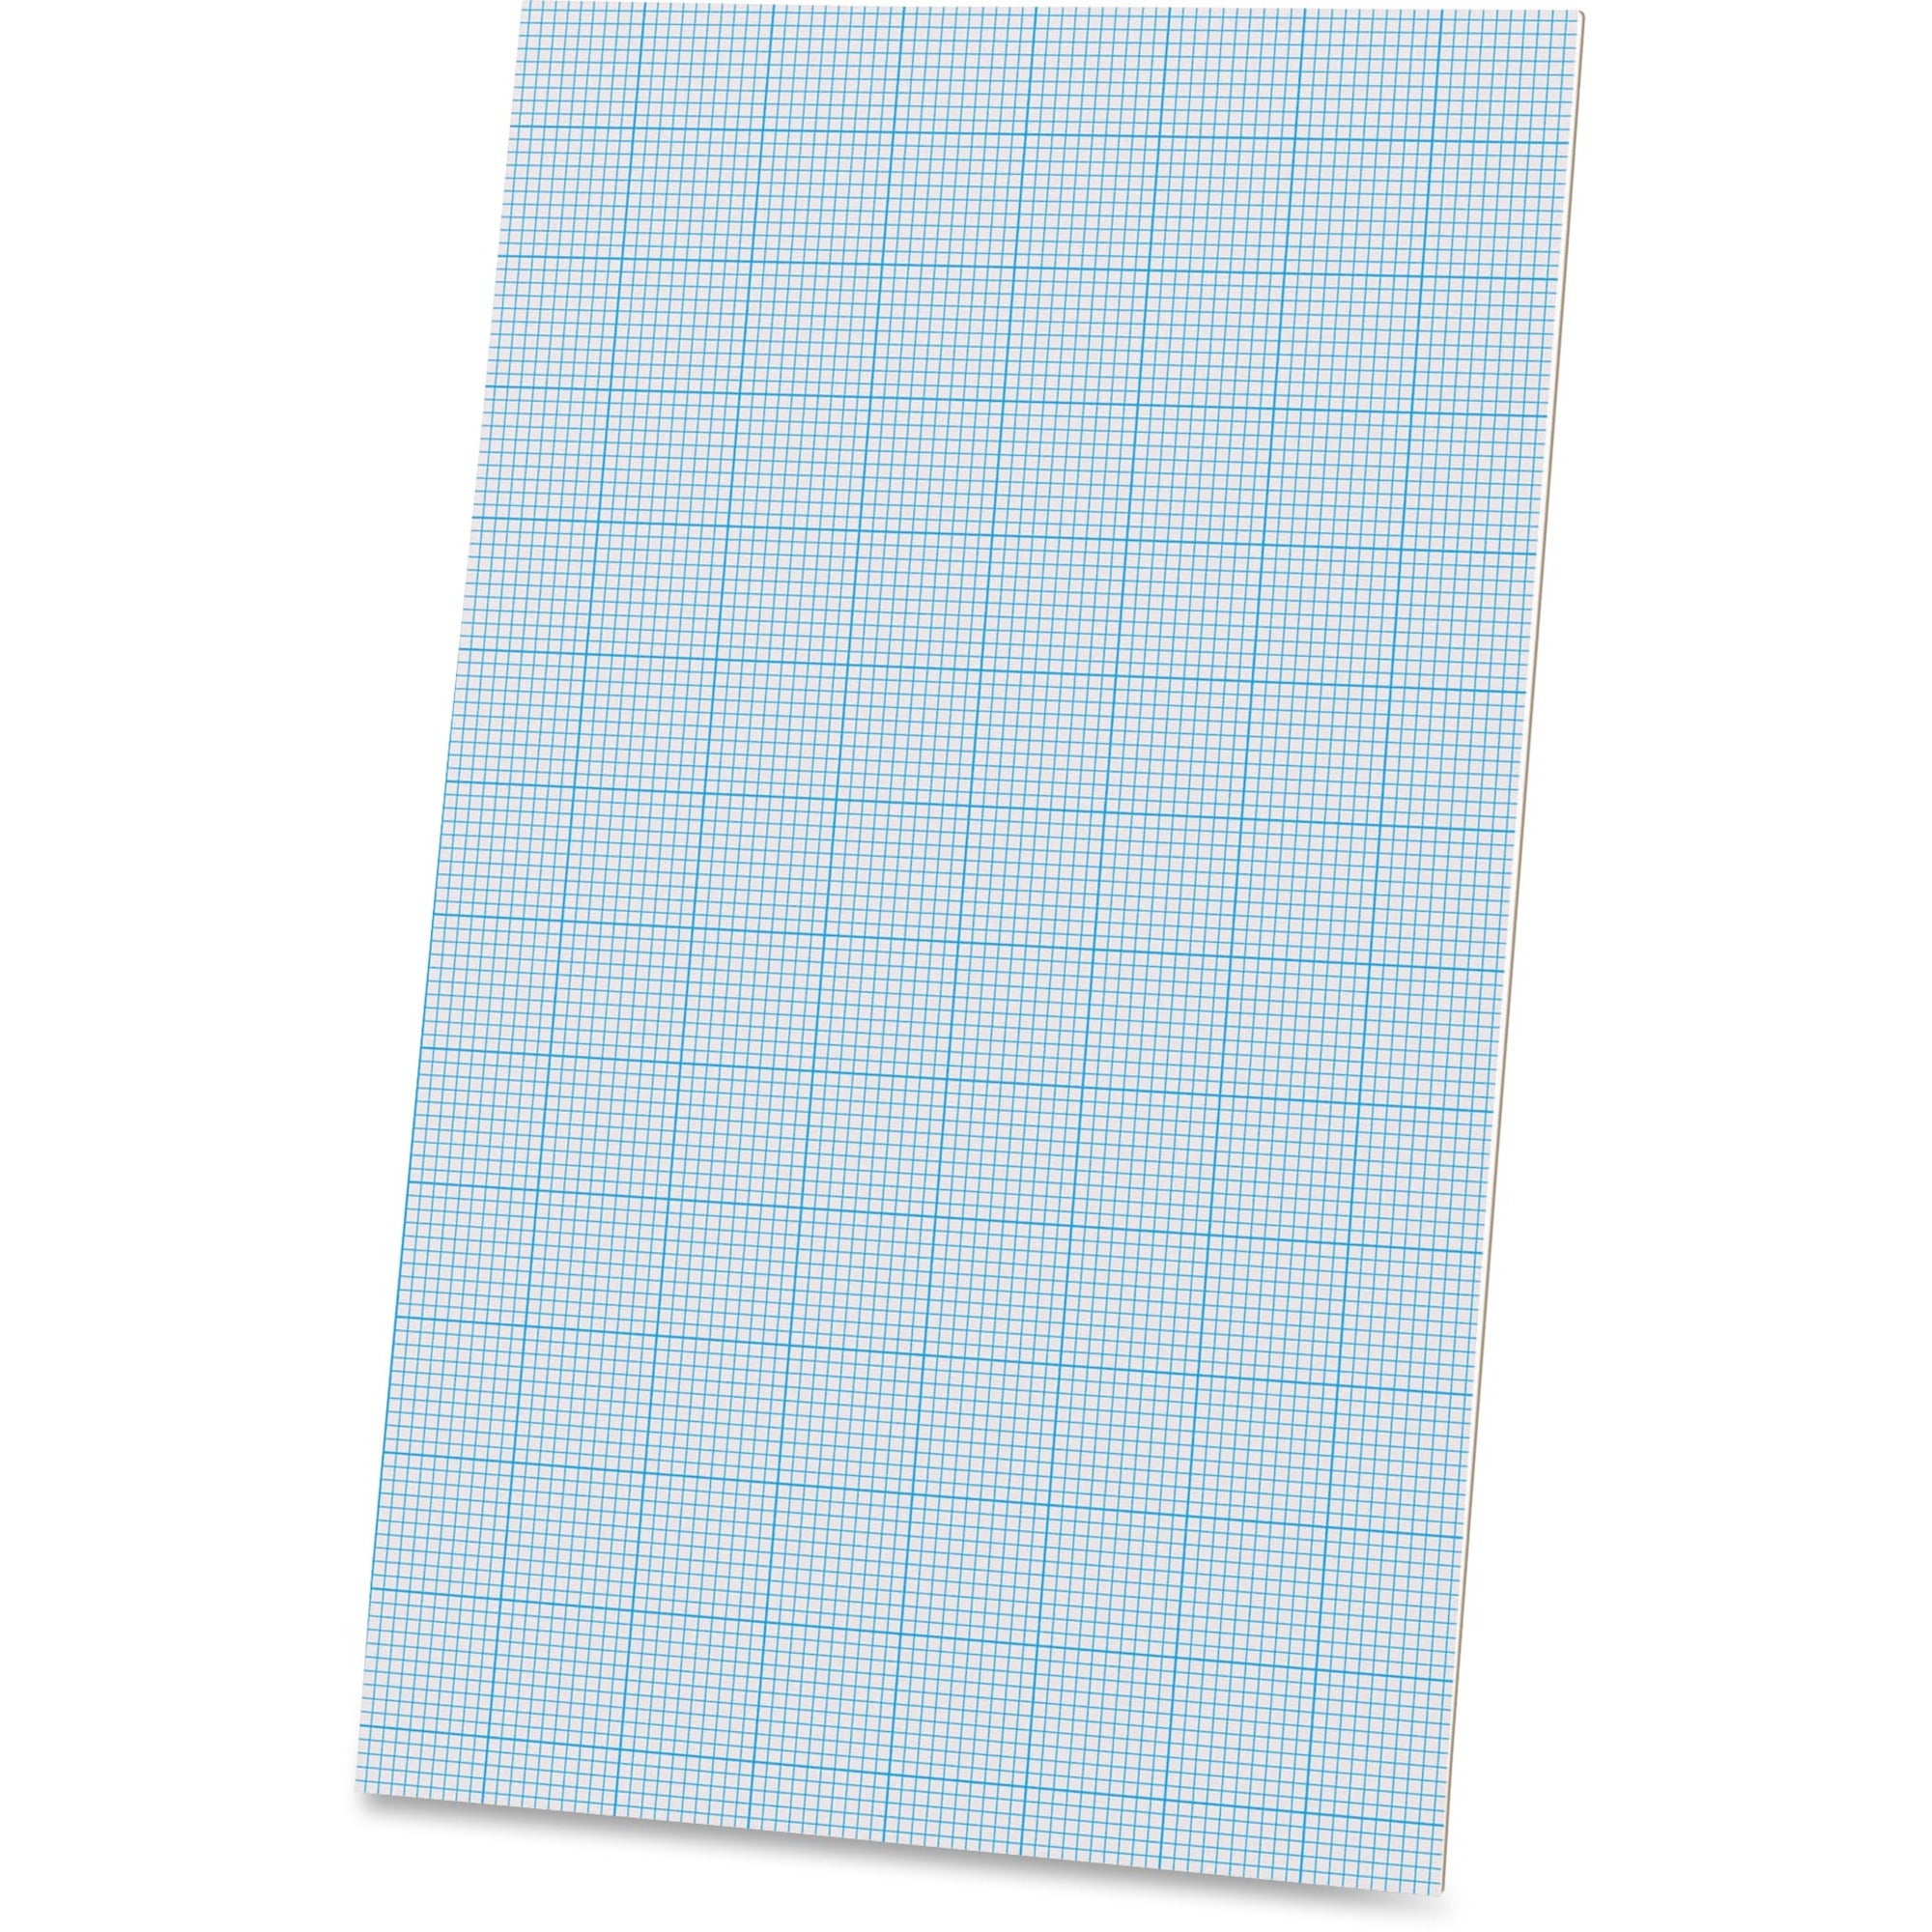 Ampad Graph Pad - 40 Sheets - Glue - 20 lb Basis Weight - Legal - 8 1/2" x 14" - White Paper - Chipboard Backing - 1 / Pad - 